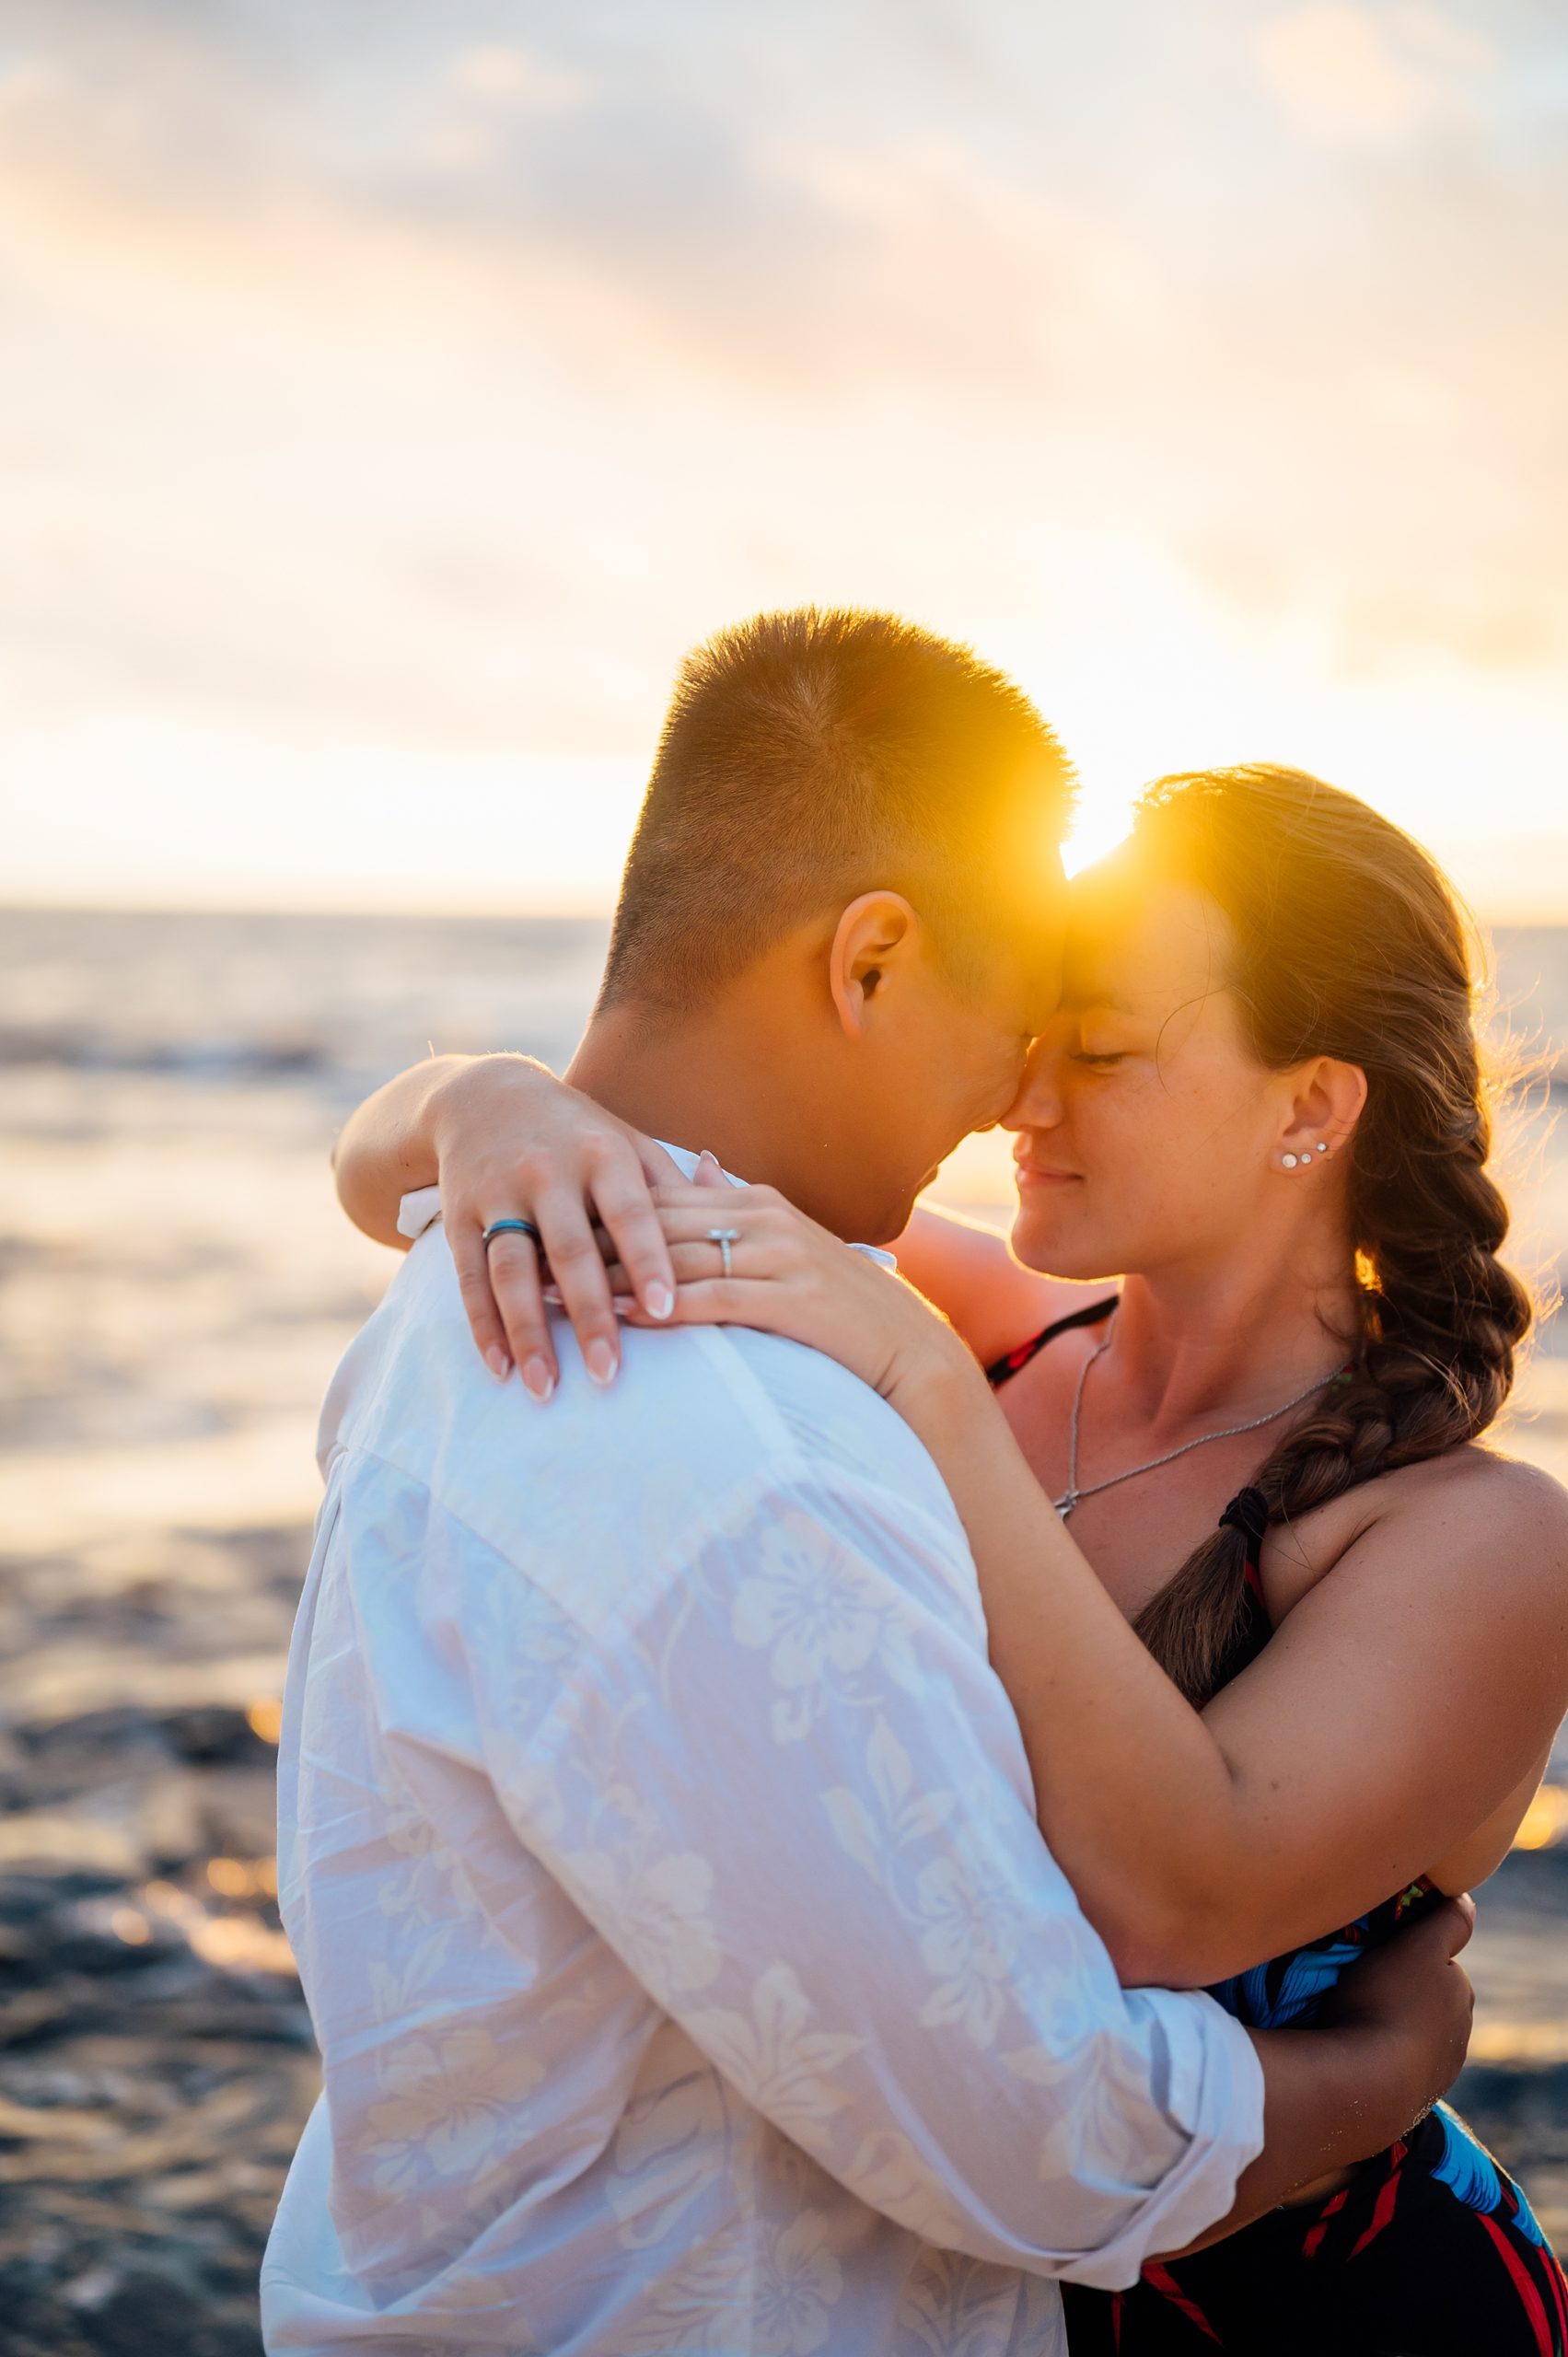 stunning sunset behind the couple during their honeymoon session